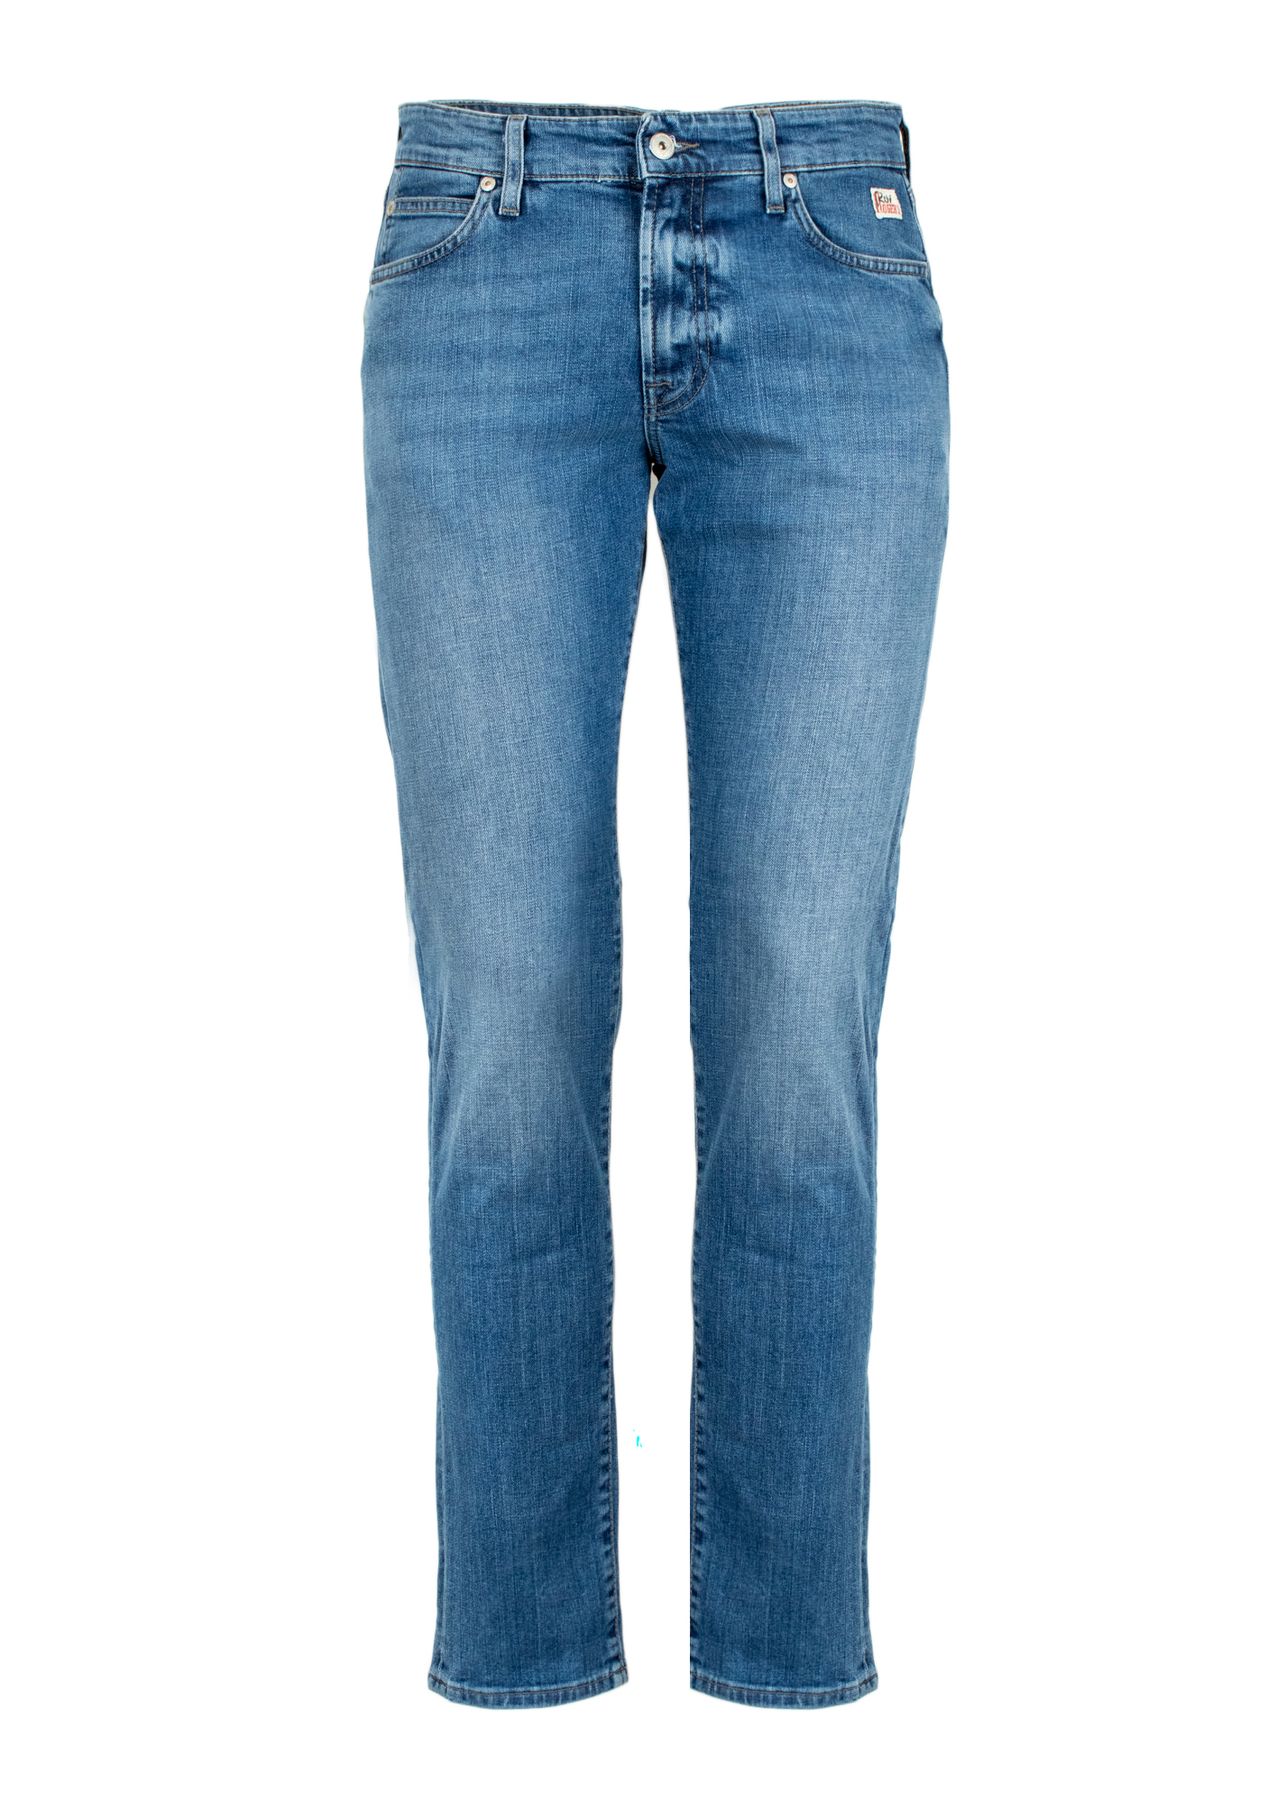 JEANS ROY ROGER'S - Immagine 1